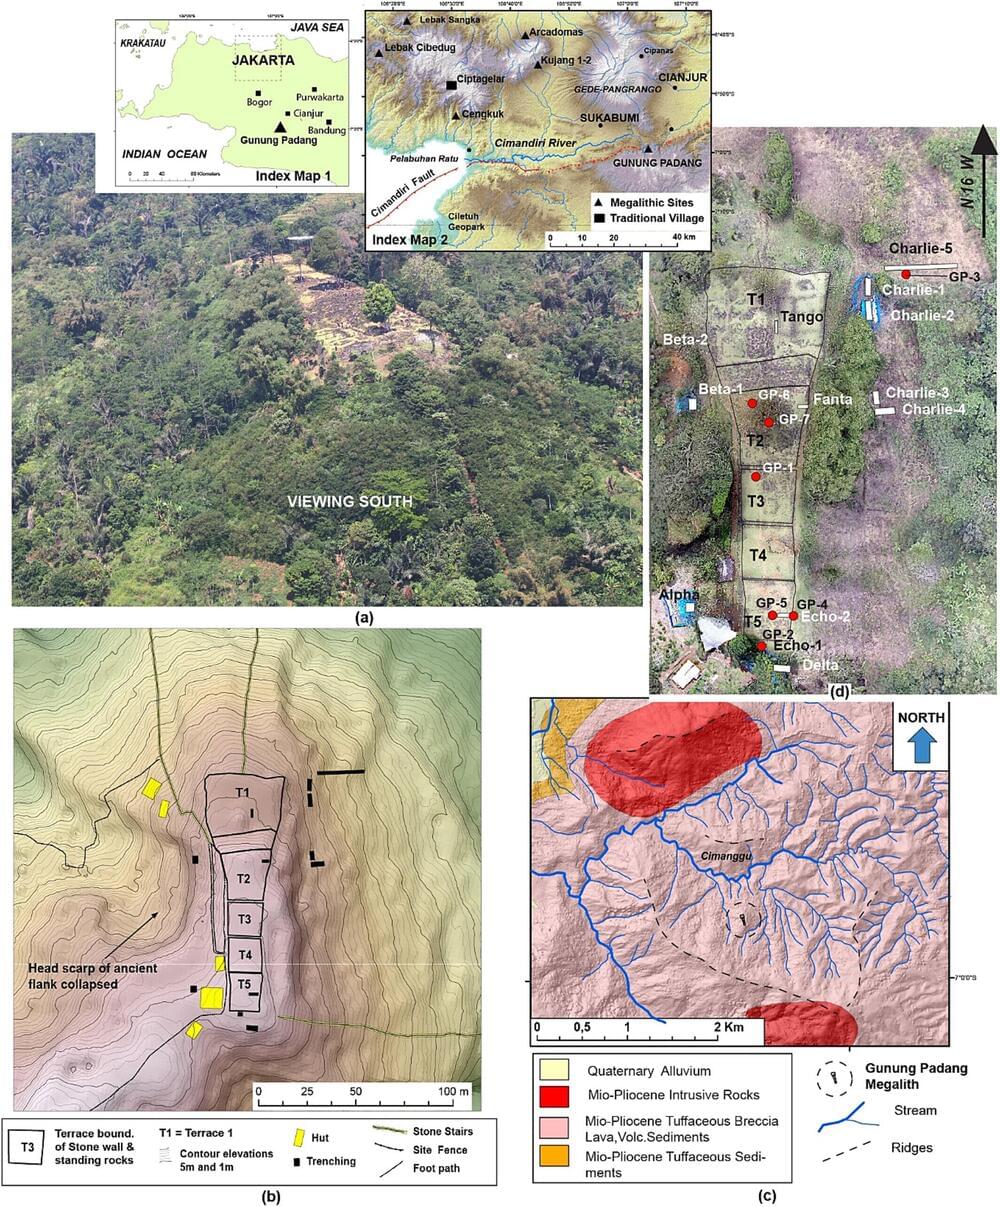 New evidence strongly suggests Indonesia’s Gunung Padang is oldest ...